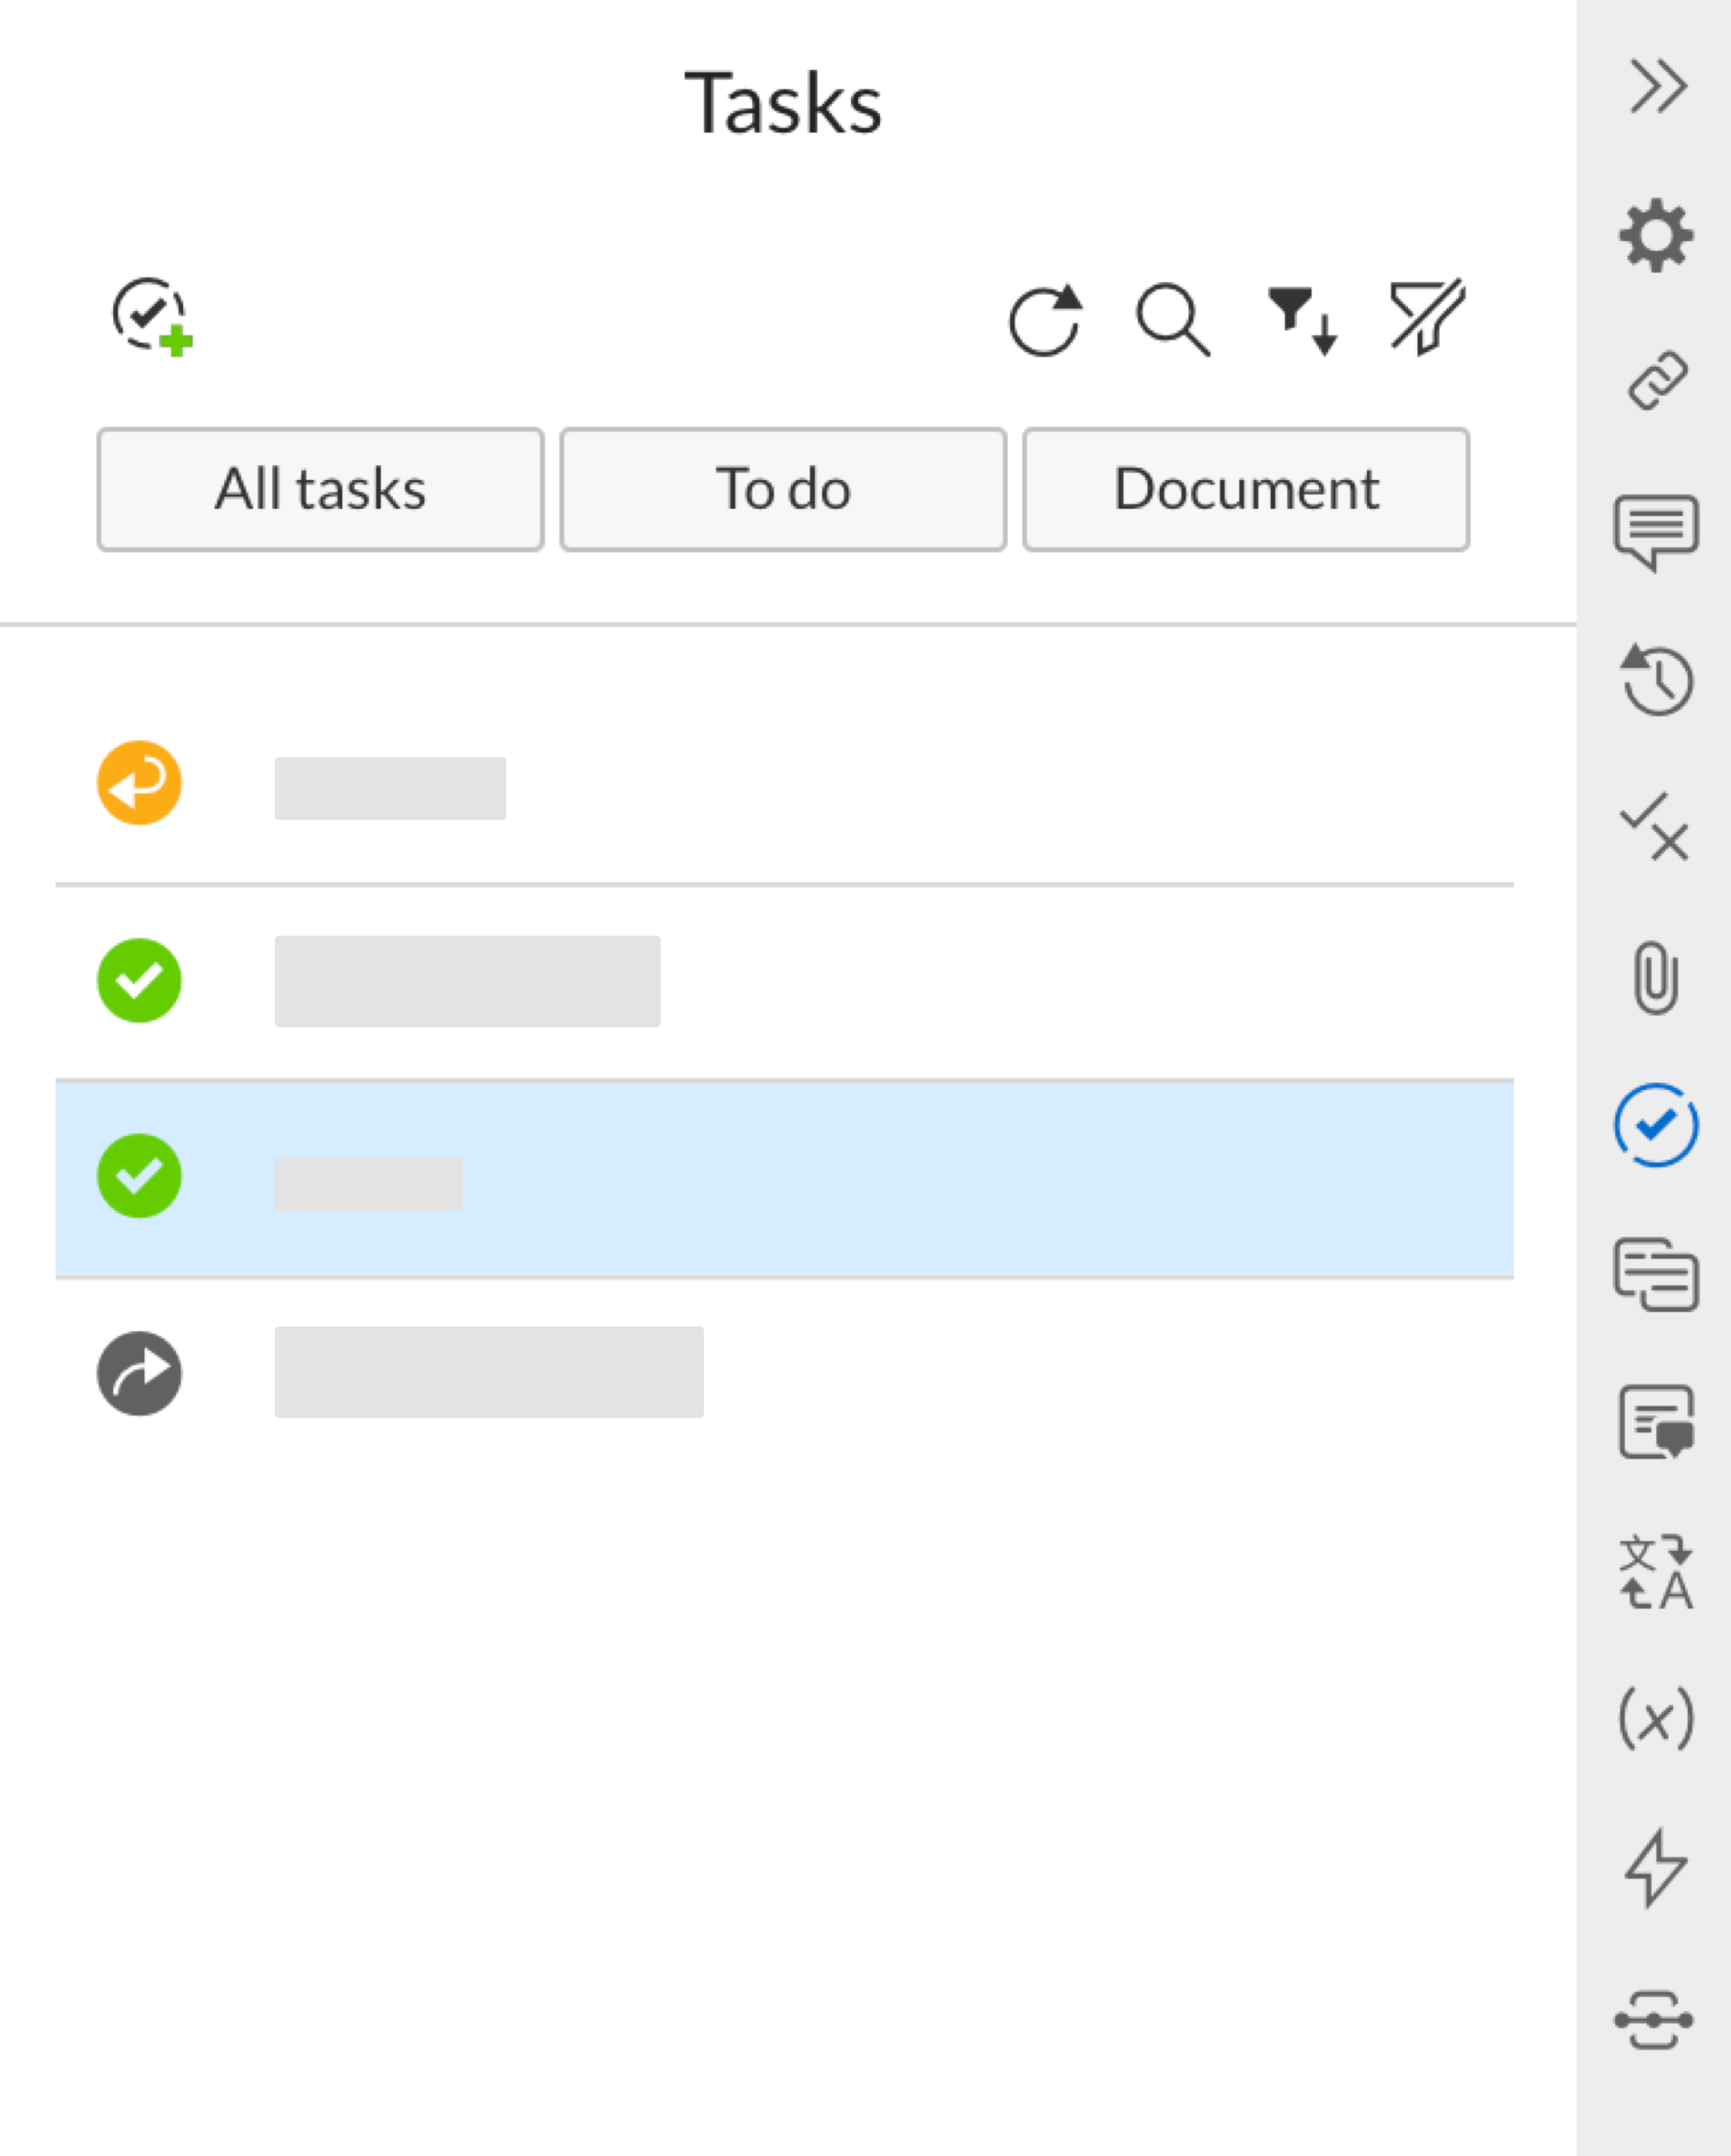 you can also access tasks from within a file by clicking the Tasks icon in the right panel